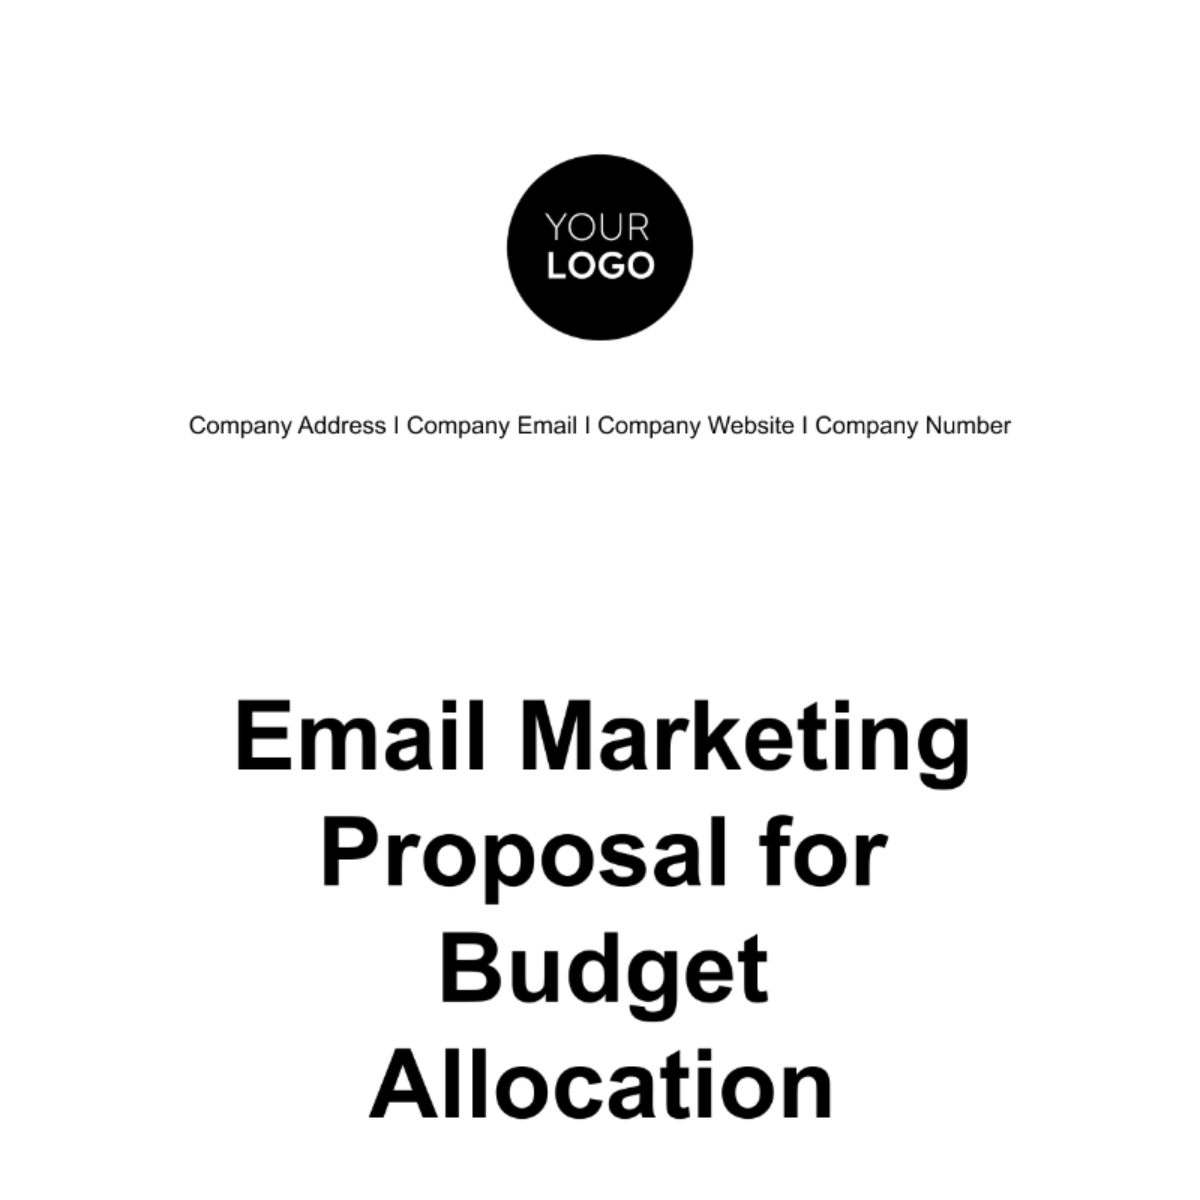 Free Email Marketing Proposal for Budget Allocation Template